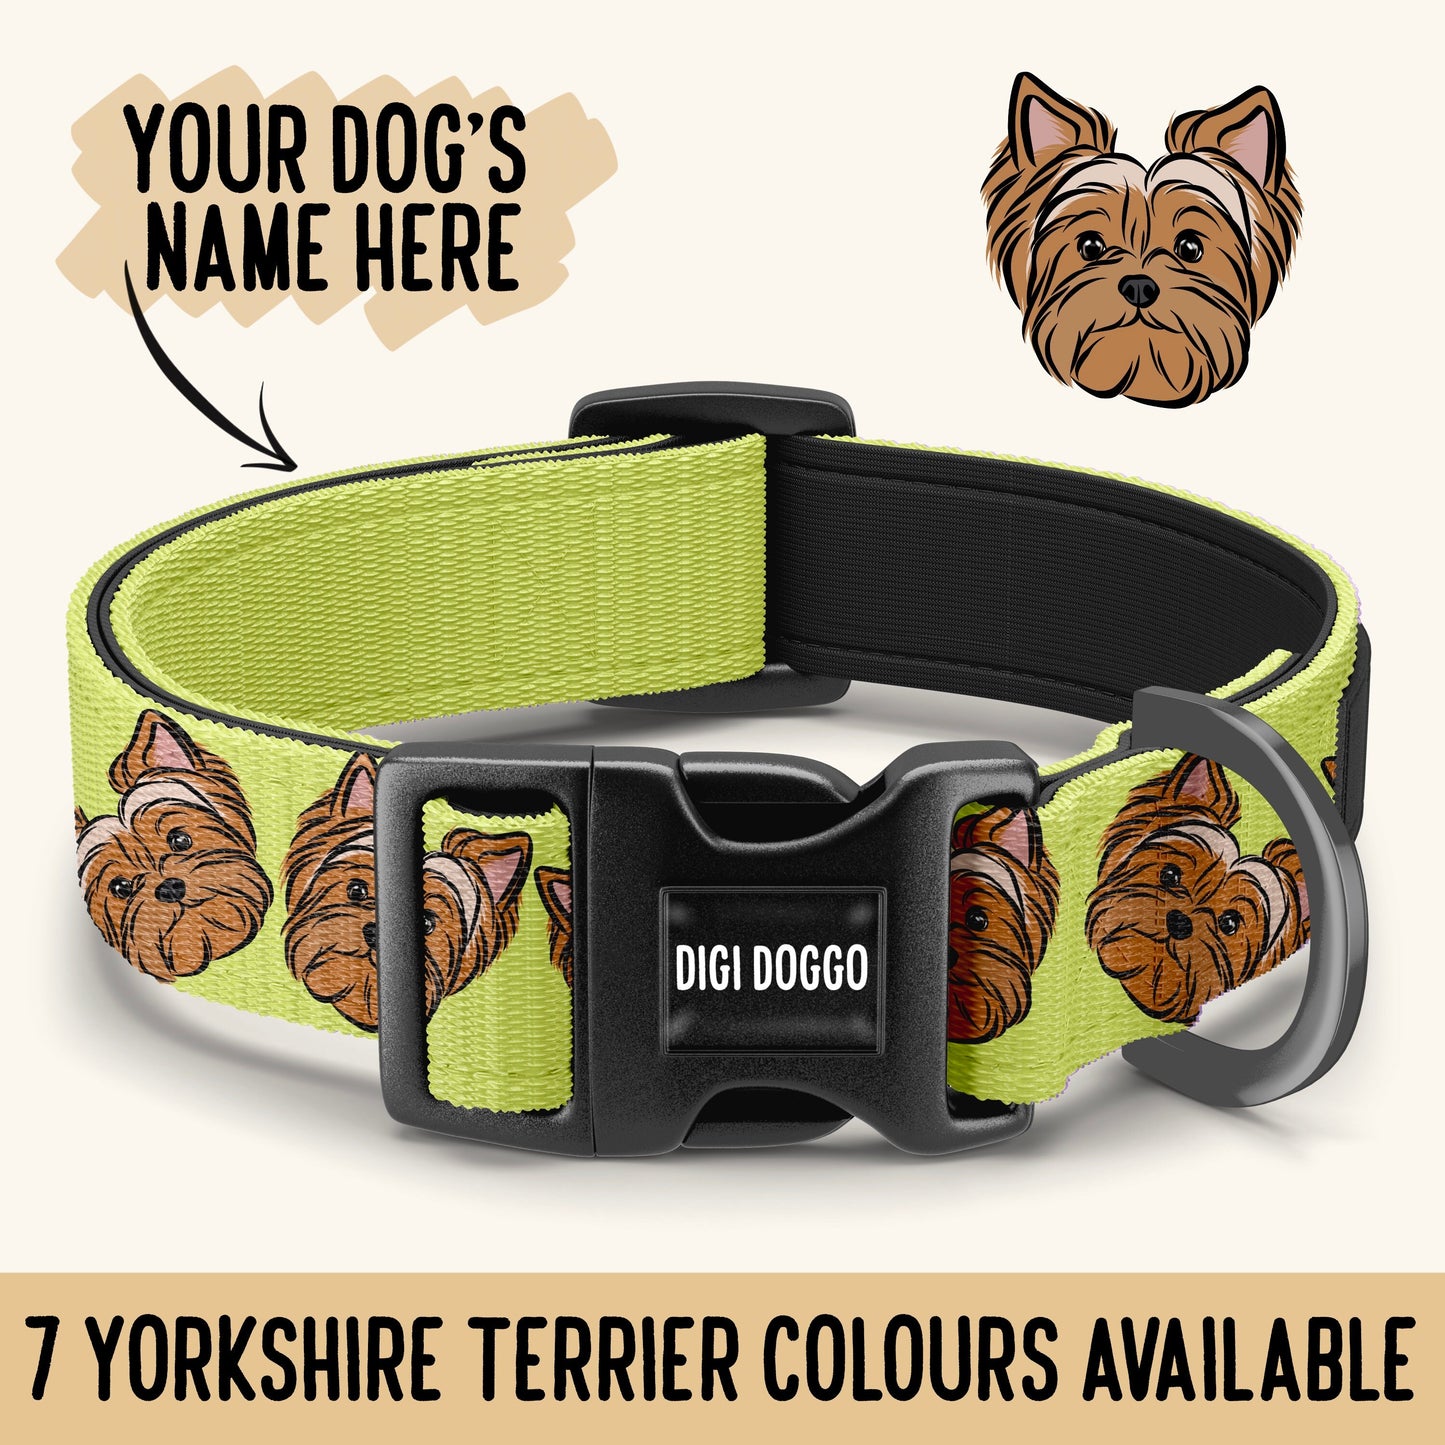 Yorkshire Terrier Collar/ Customised Dog Face Pattern Collar/ Pet Collar With Name/ Small Dog Breed Collar/ Yorkie Mum Gifts/ Yorkie Owner